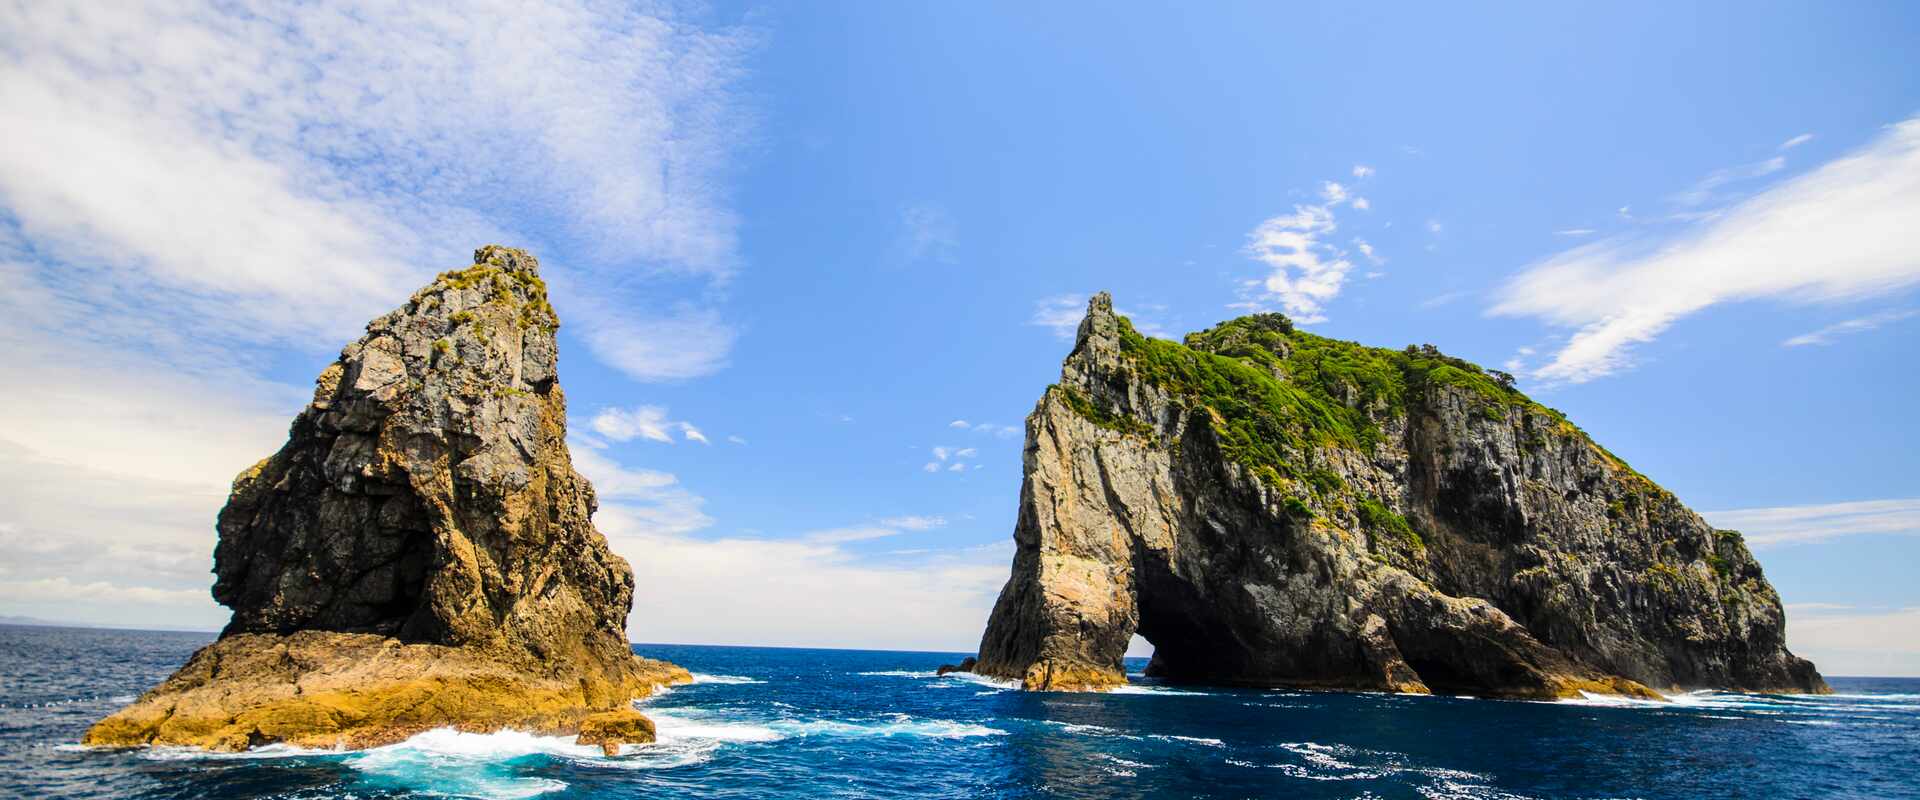 Small upright rocky islands, part of the Bay of Islands located in New Zealand